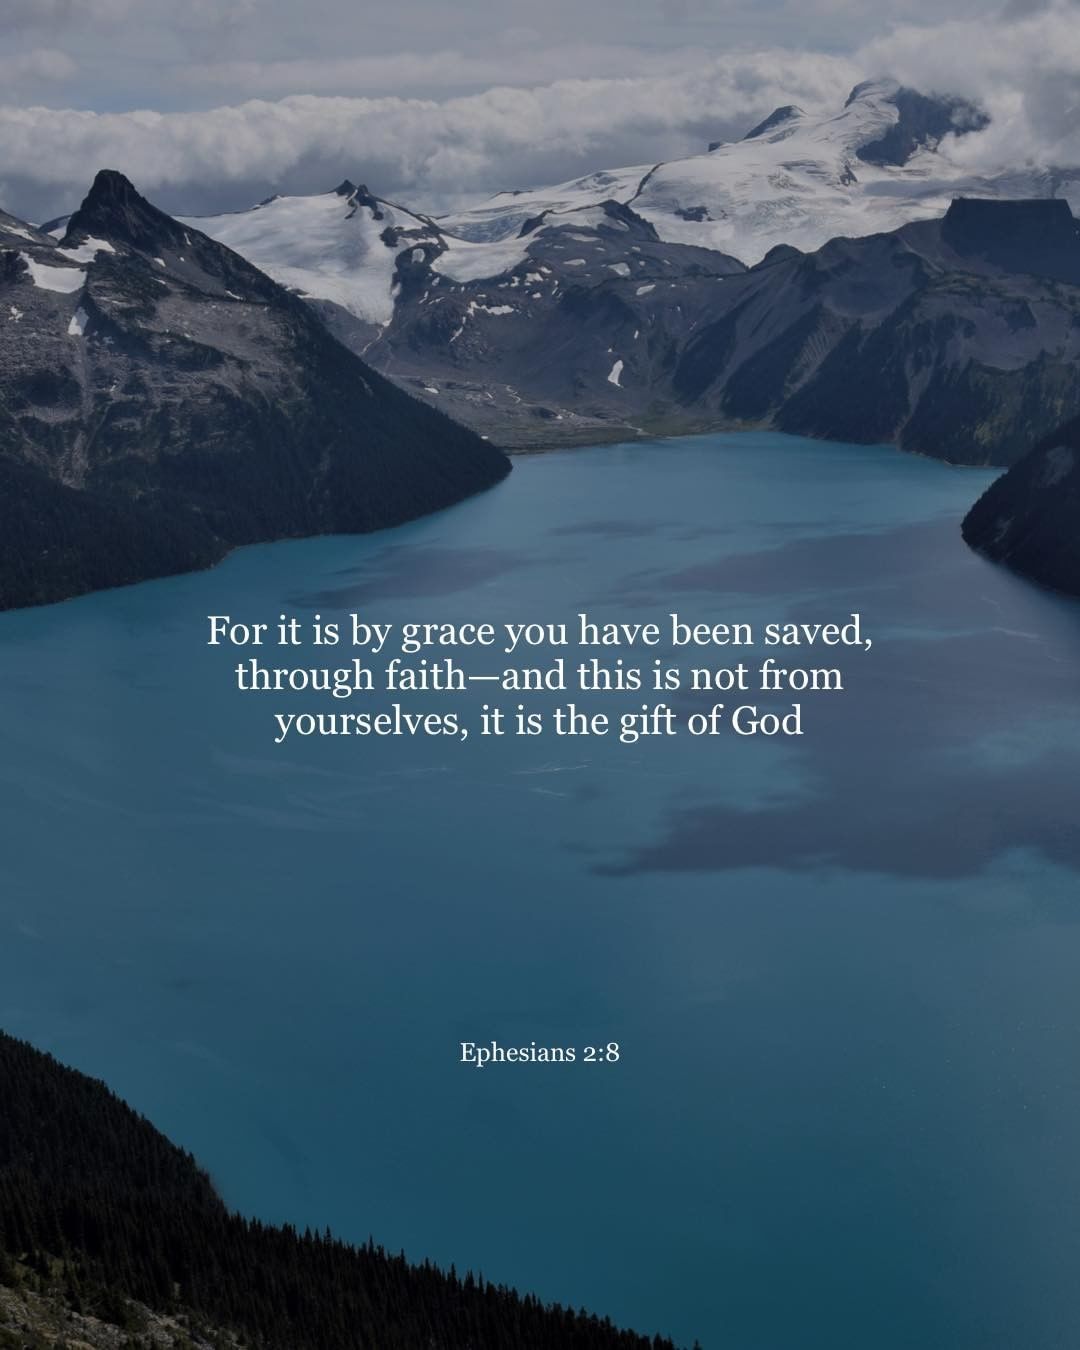 For it is by grace you have been saved, through faith  and this is not yourselves; it is the gift of God Ephesians 2.8 from